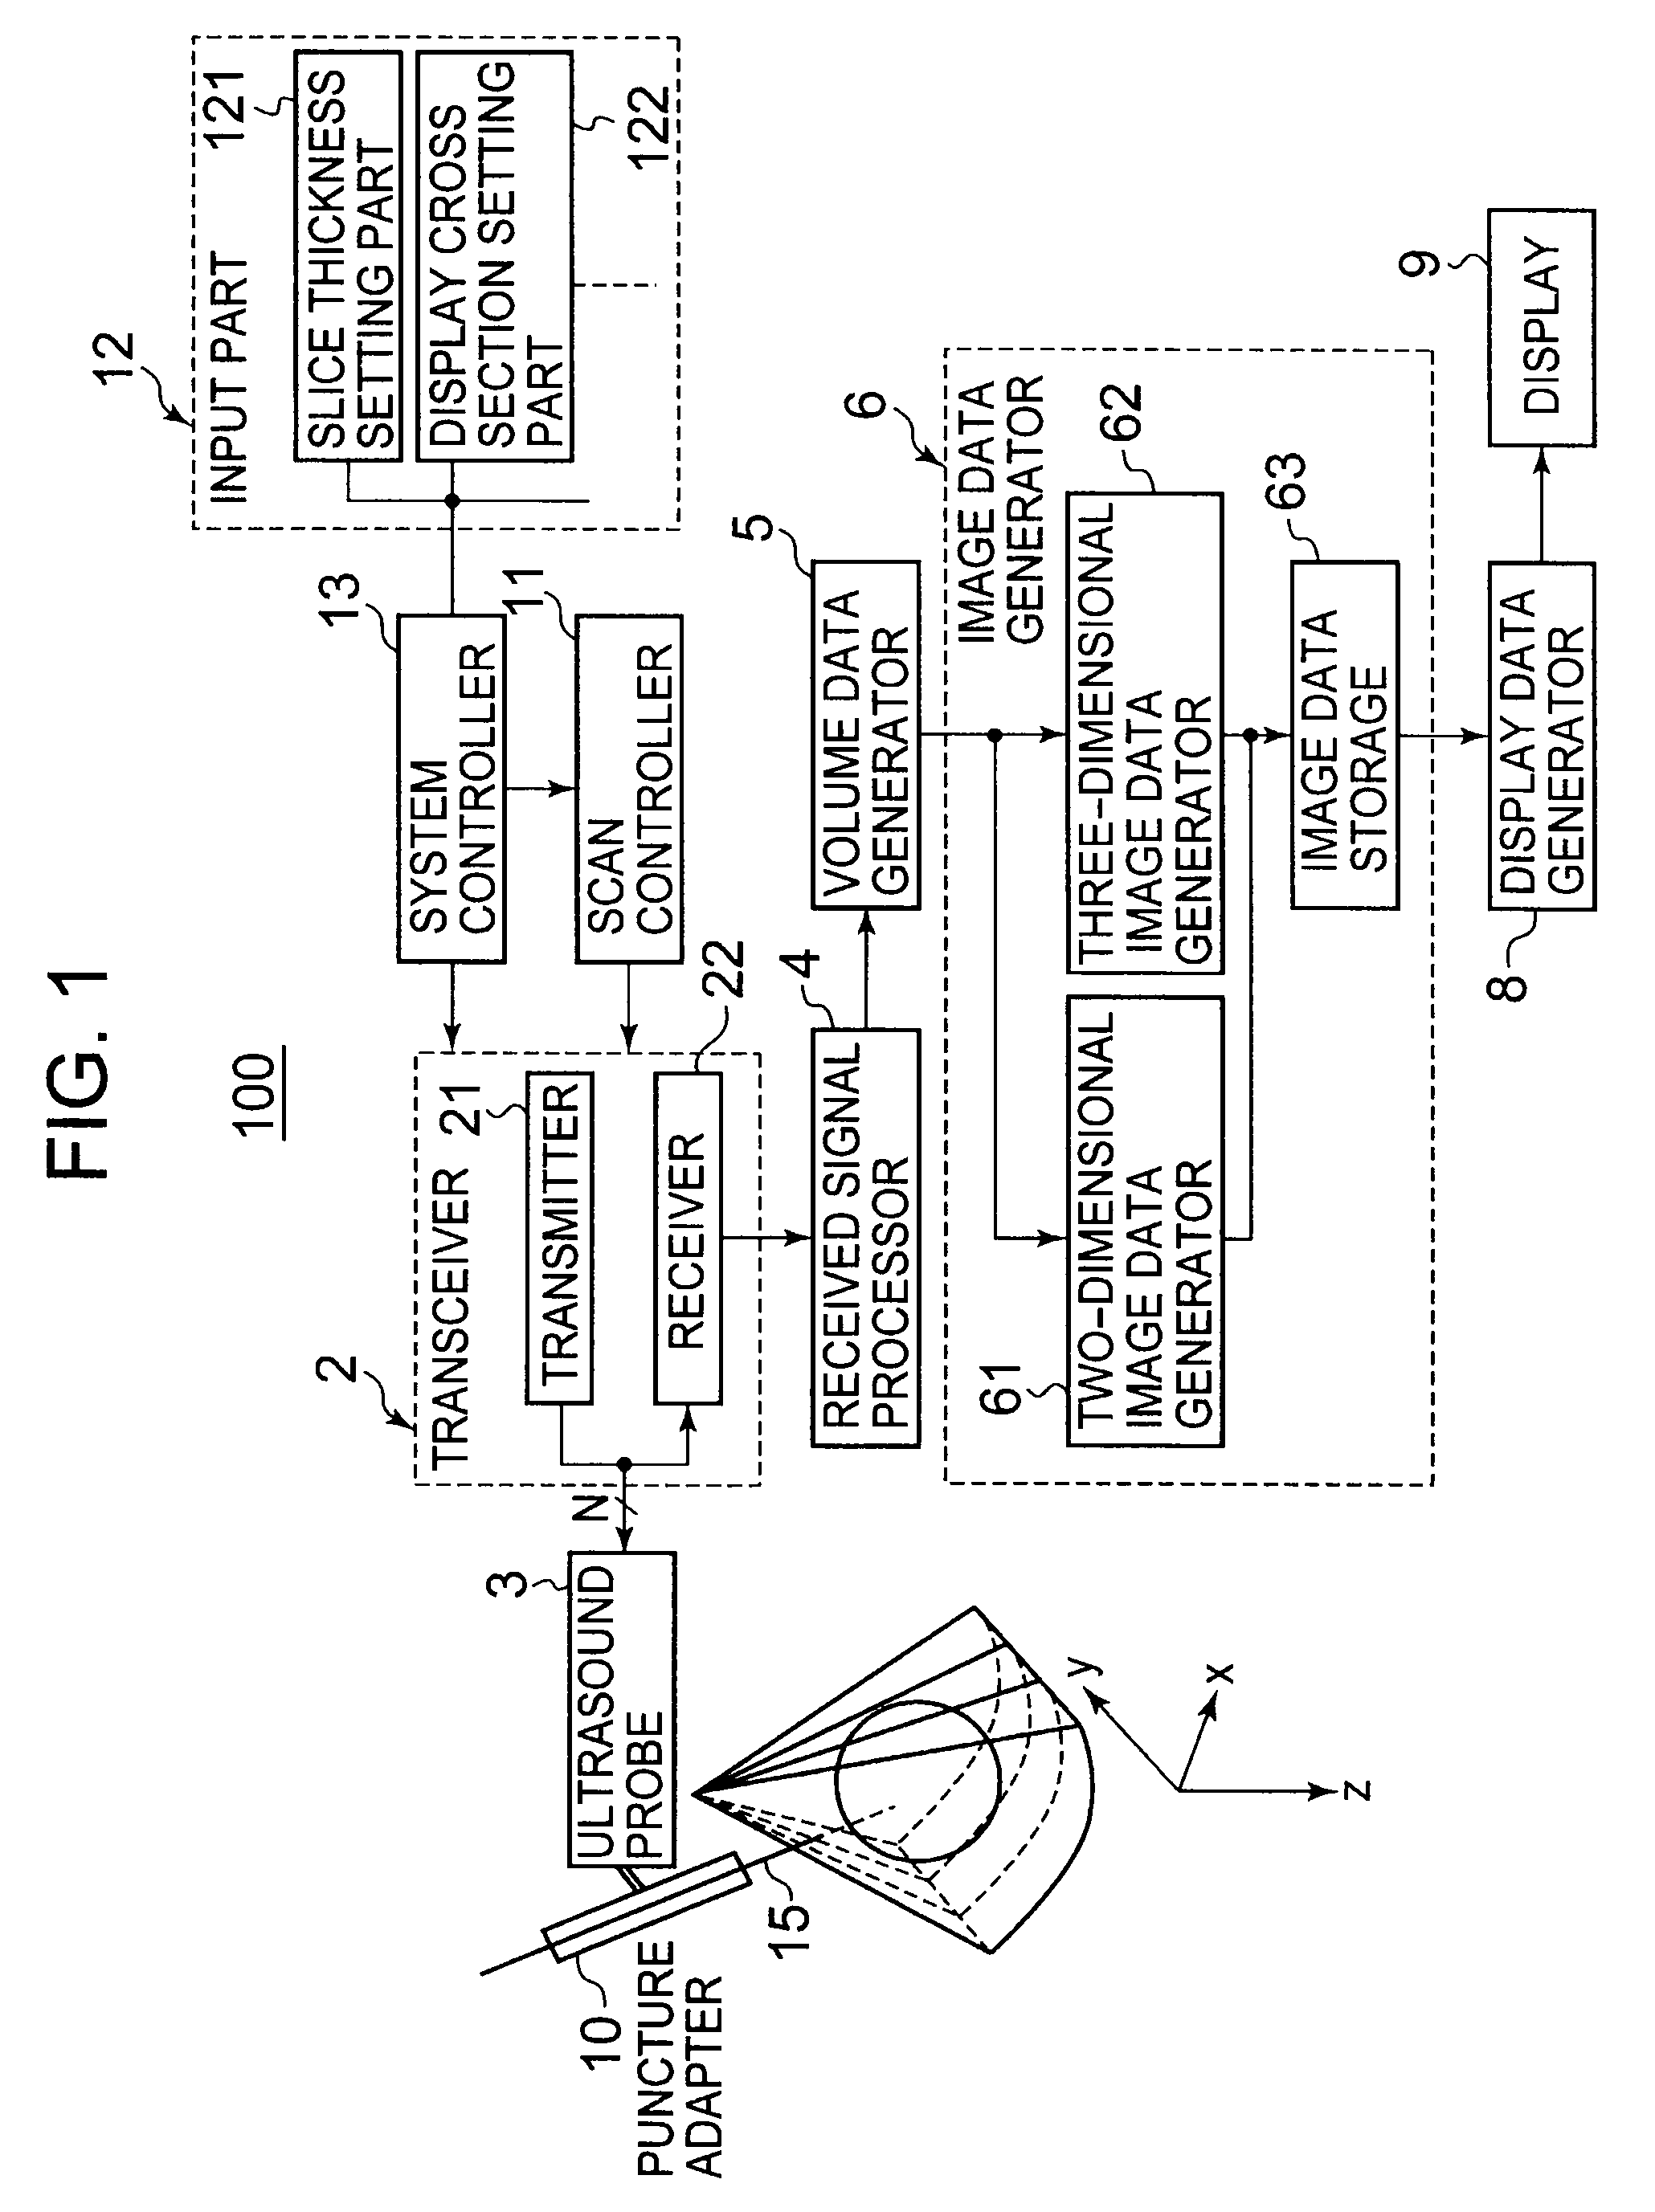 Ultrasound imaging apparatus and method for generating ultrasound image